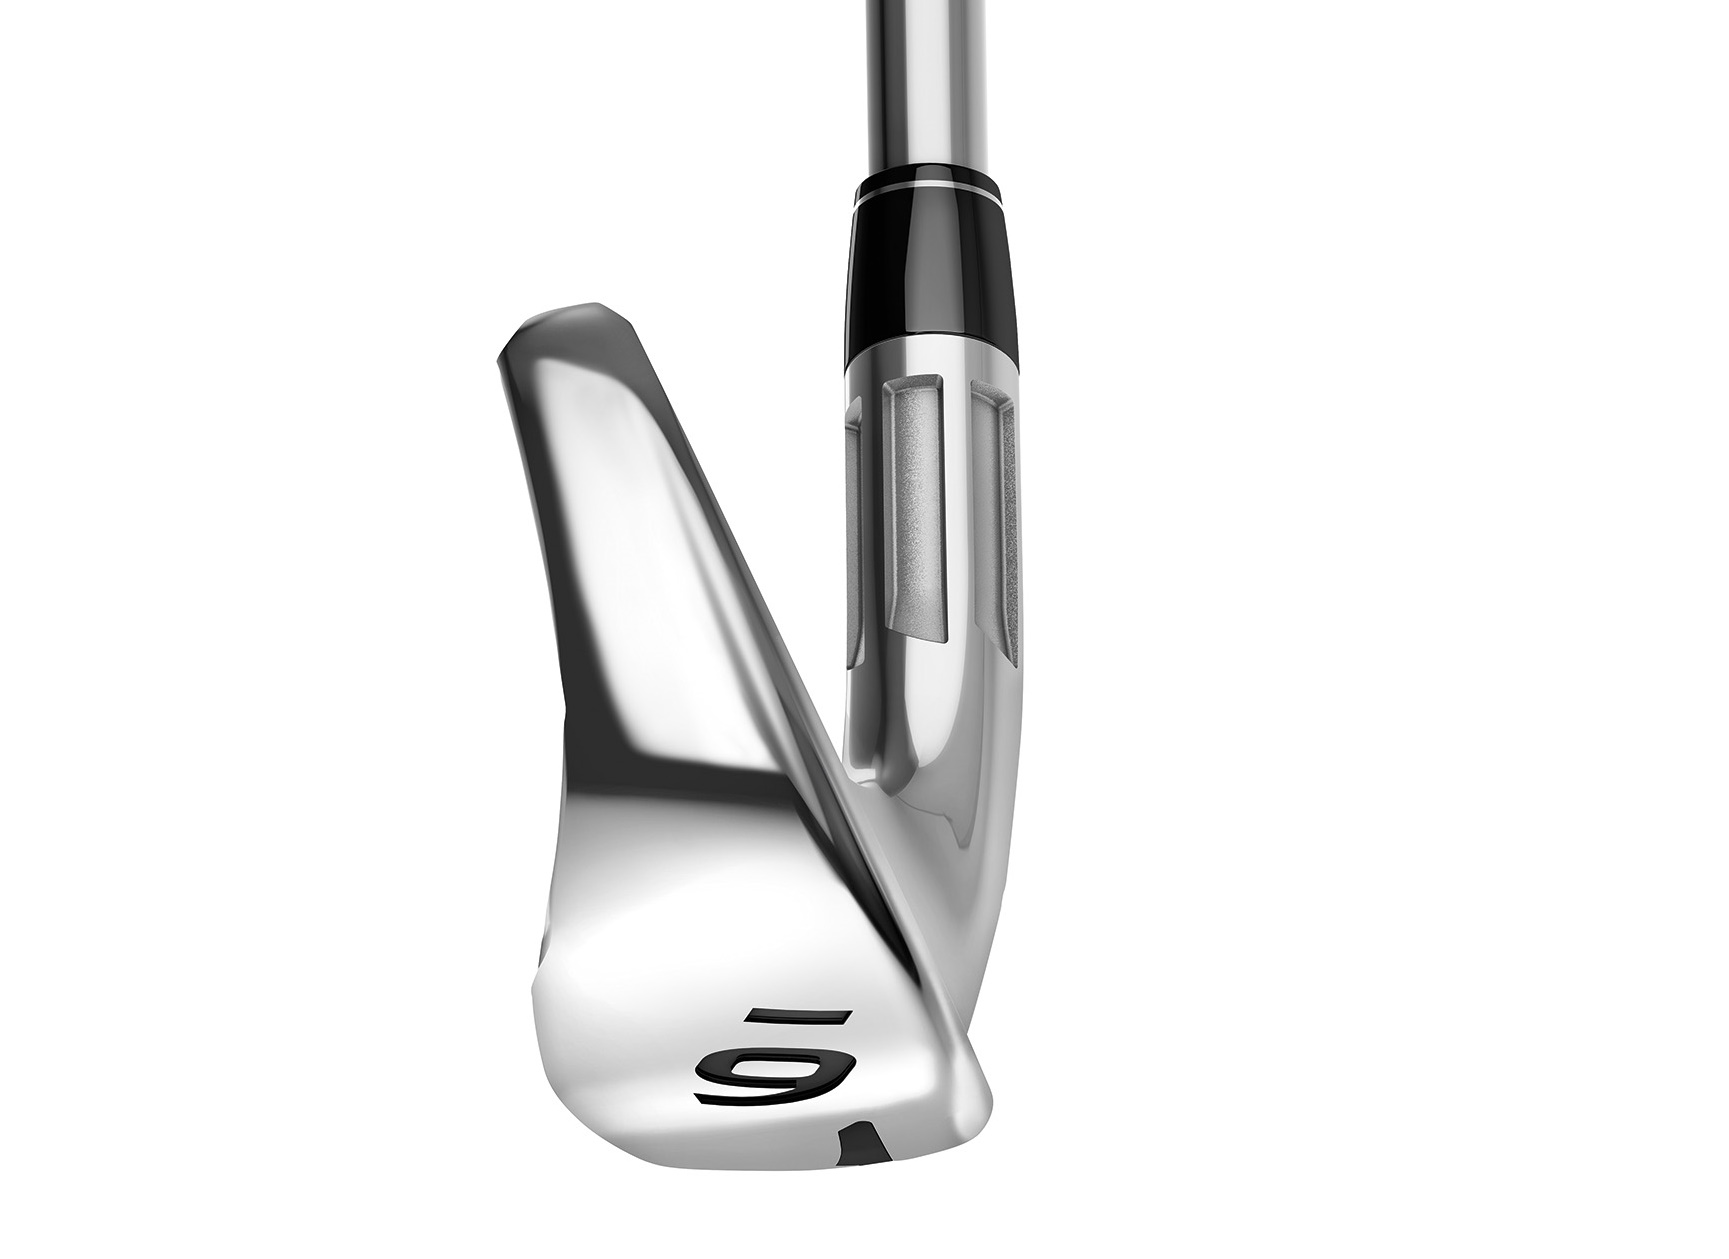 TaylorMade launches all-new M1 iron and revamps the M2 iron